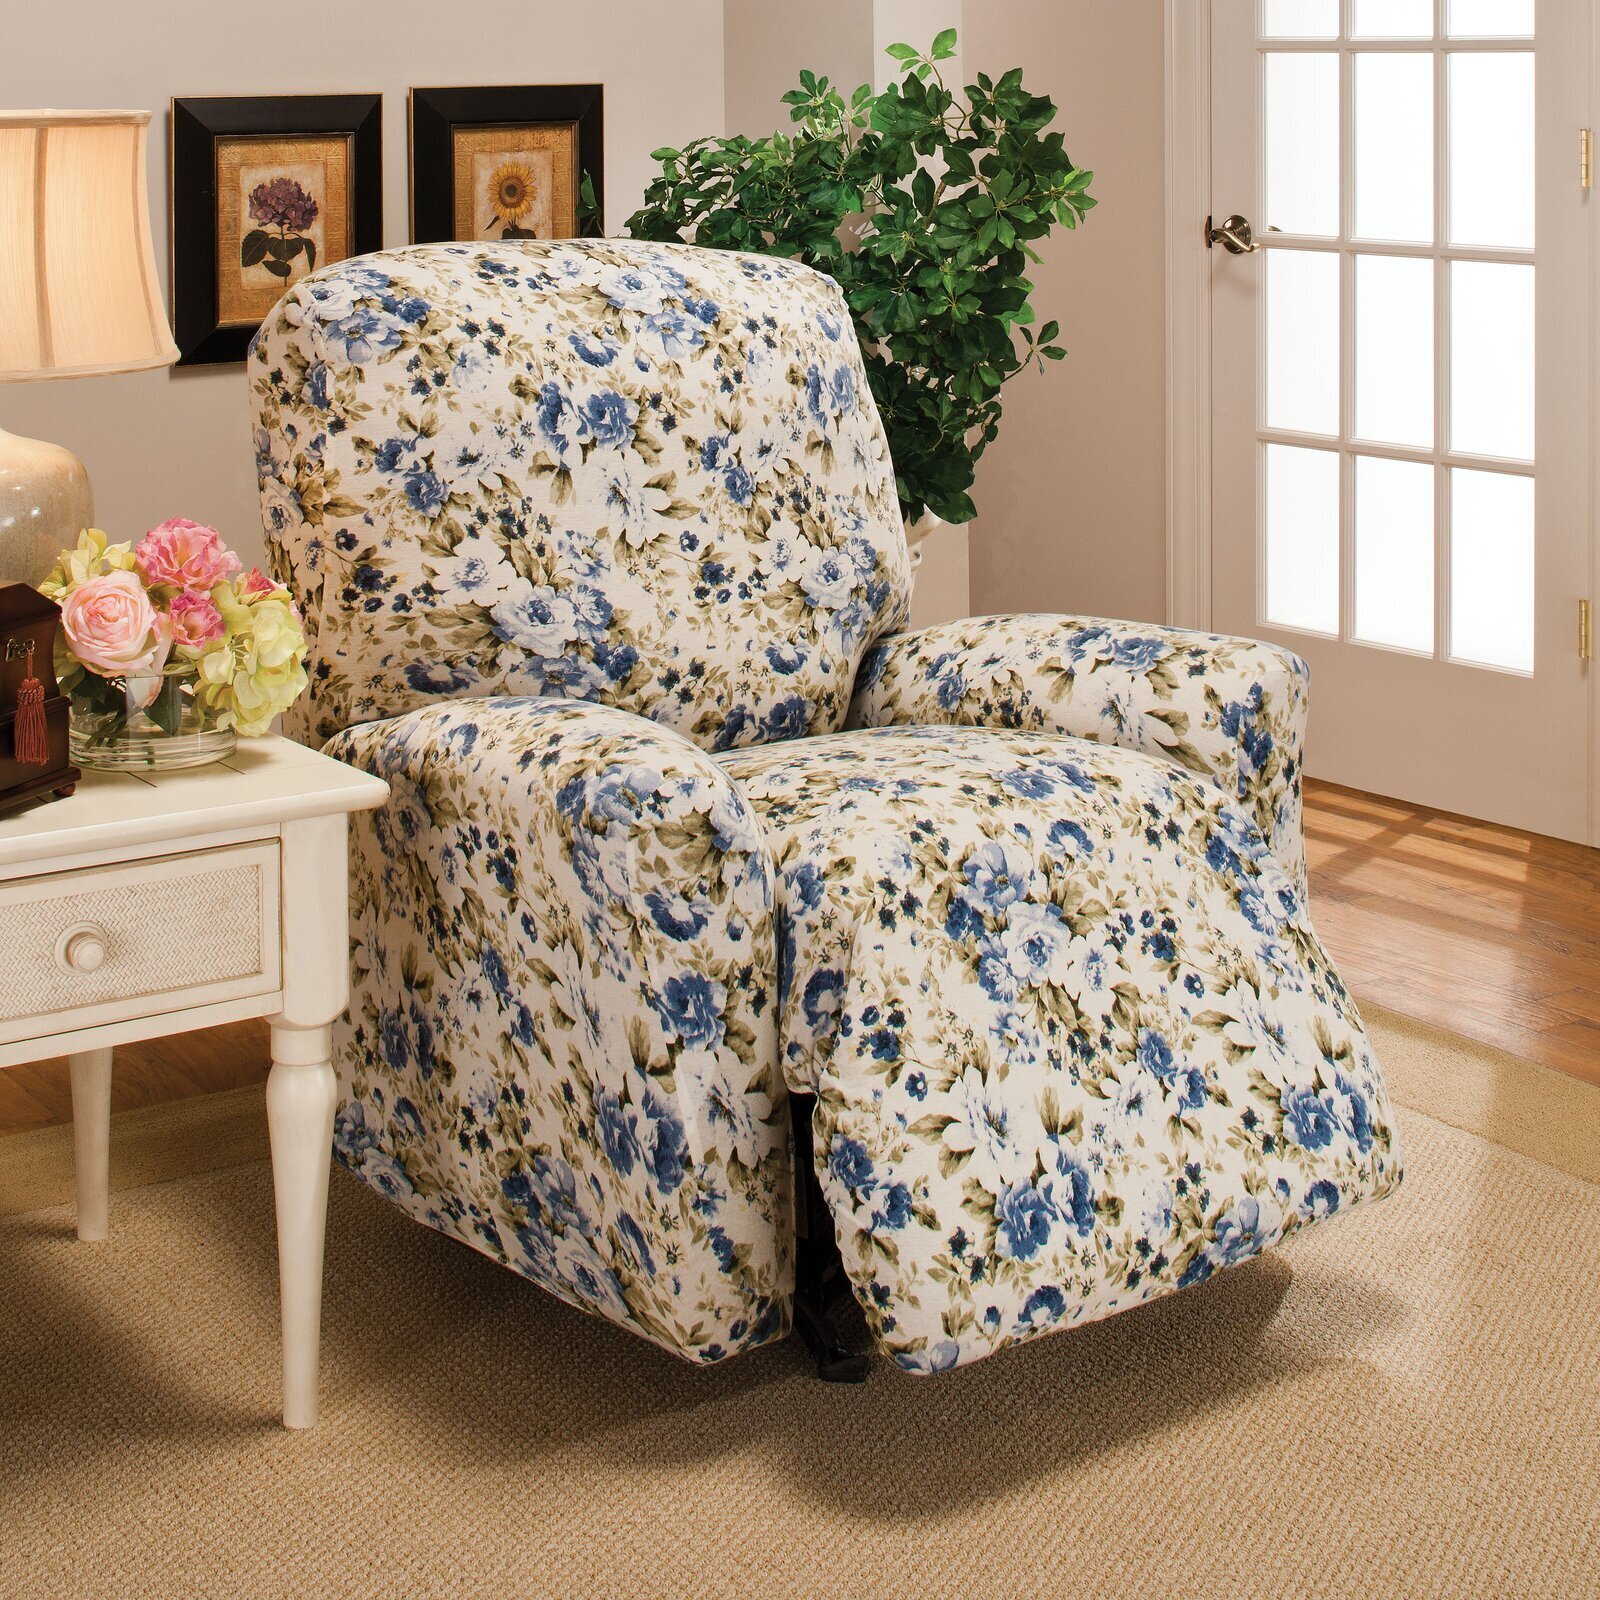 Floral Pattern Large Recliner Chair Cover